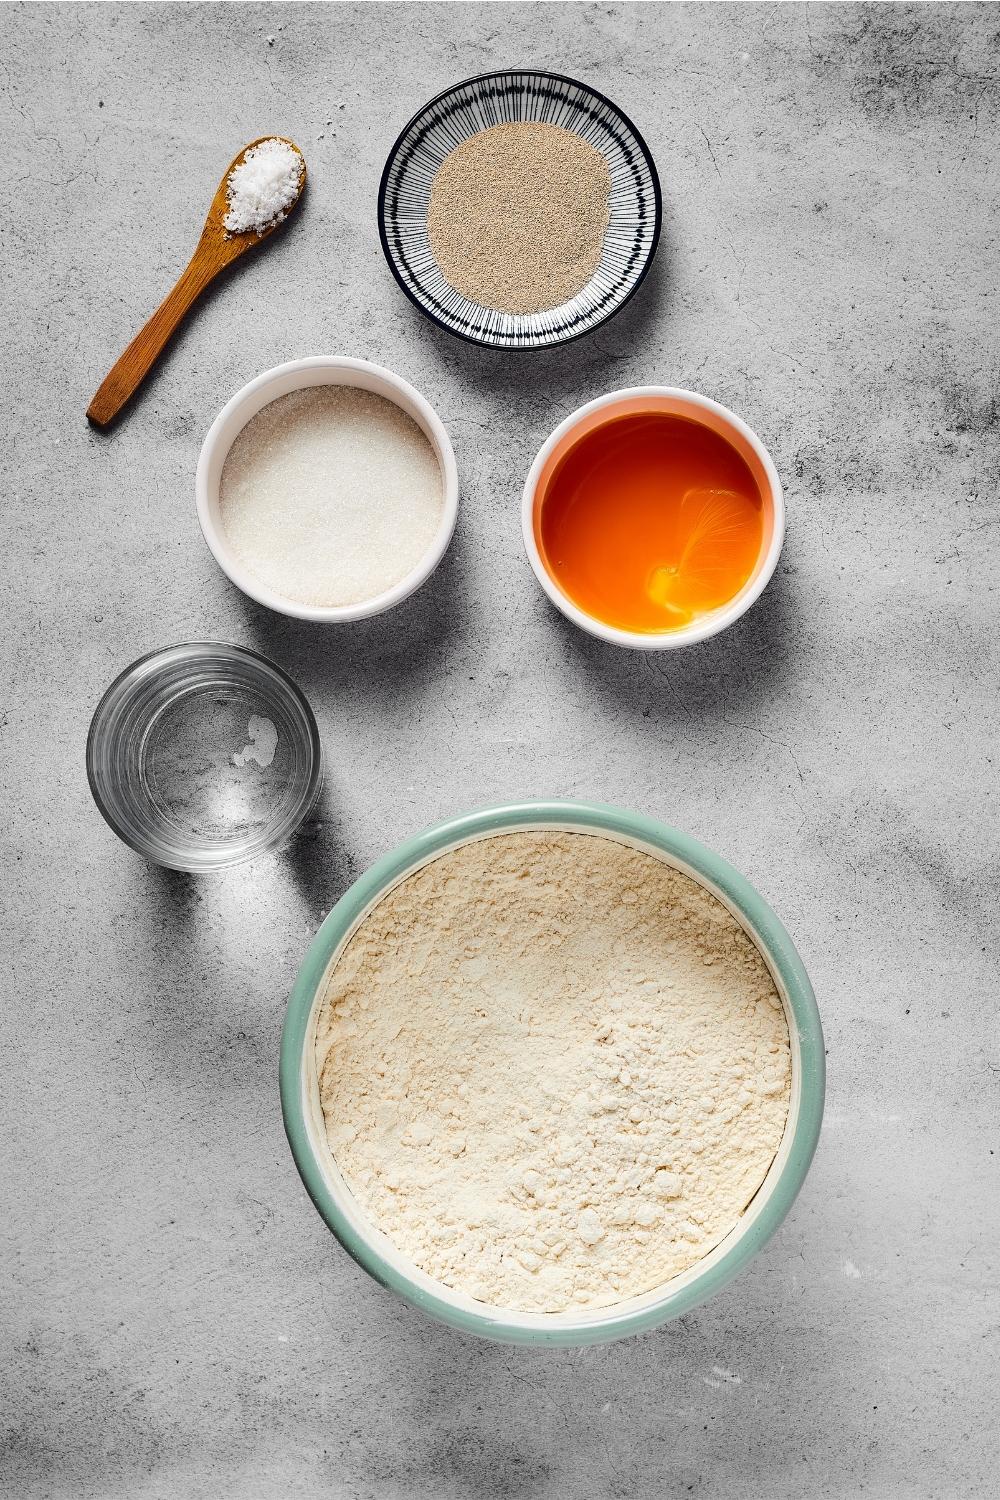 A bowl of flour, small white bowl of egg yolk, small white bowl of sugar, a small plate of yeast, and a small spoon with salt on it all on a gray counter.